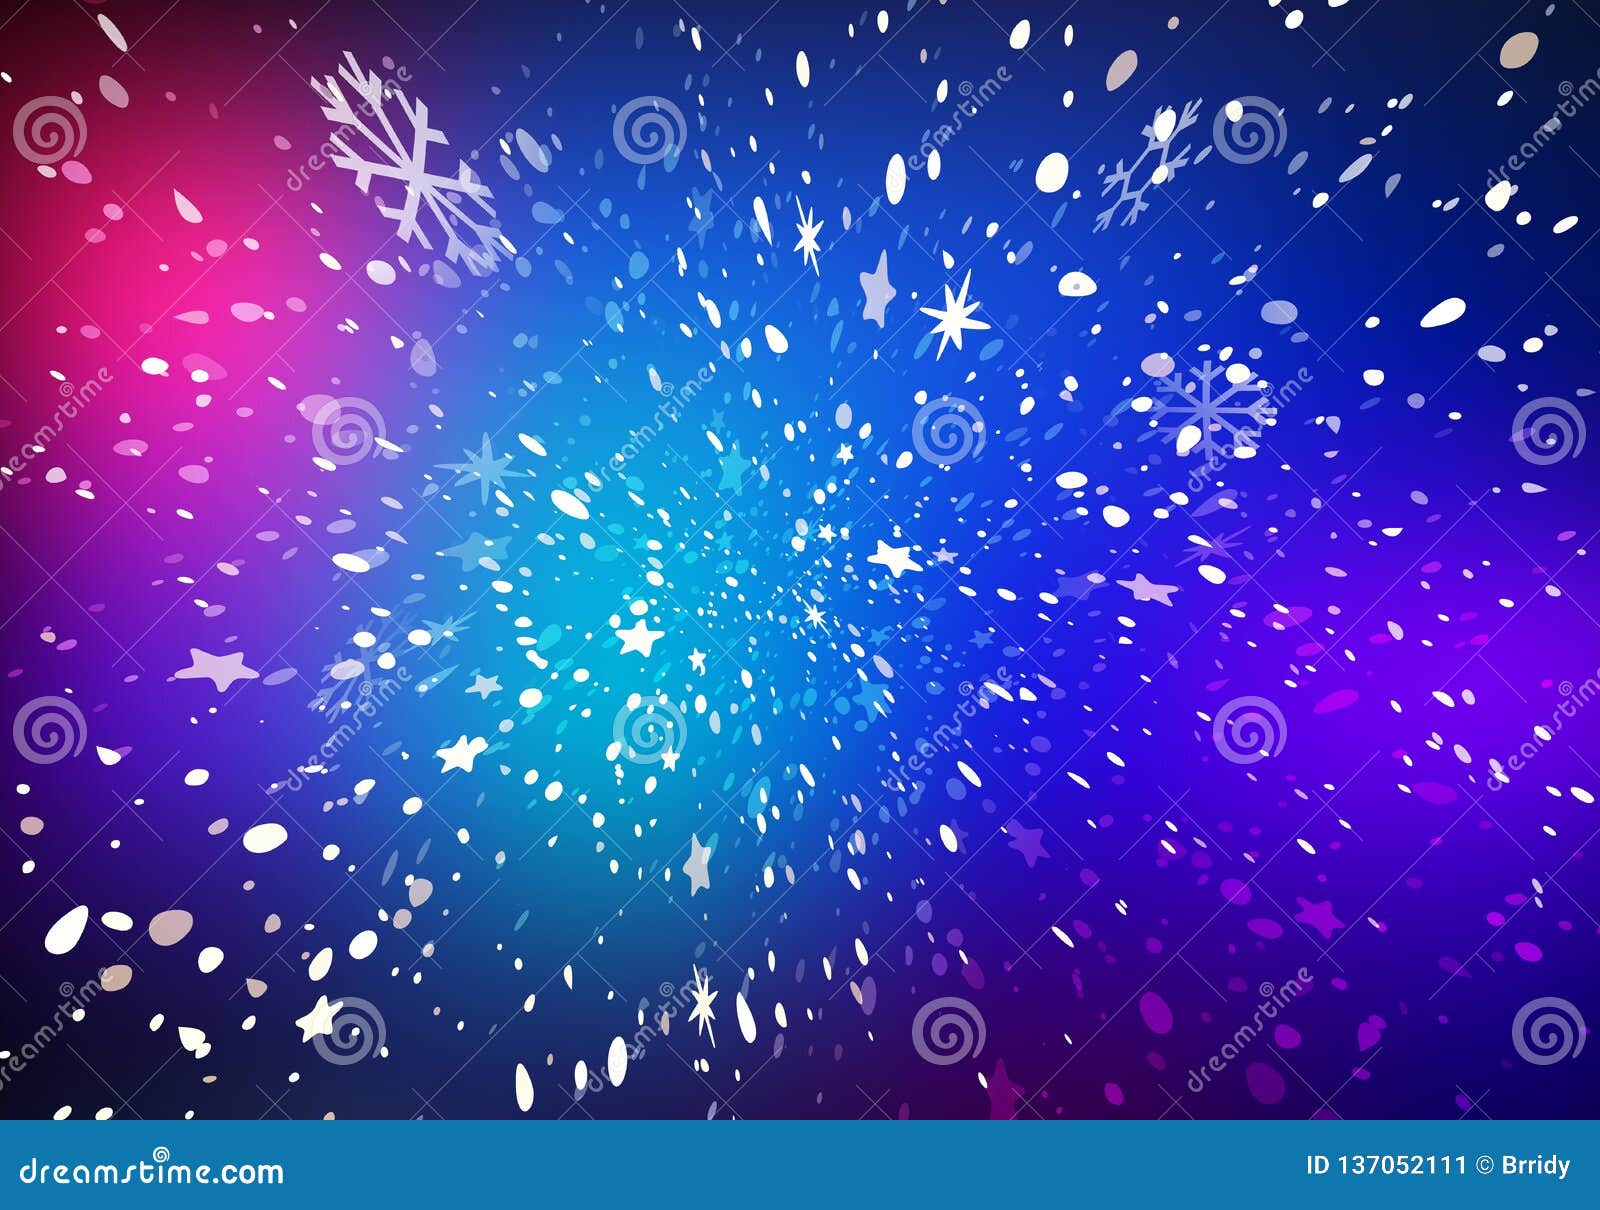 Blurry Lights Background with Falling Snow. Abstract Colorful Winter BG  Stock Vector - Illustration of color, abstract: 137052111